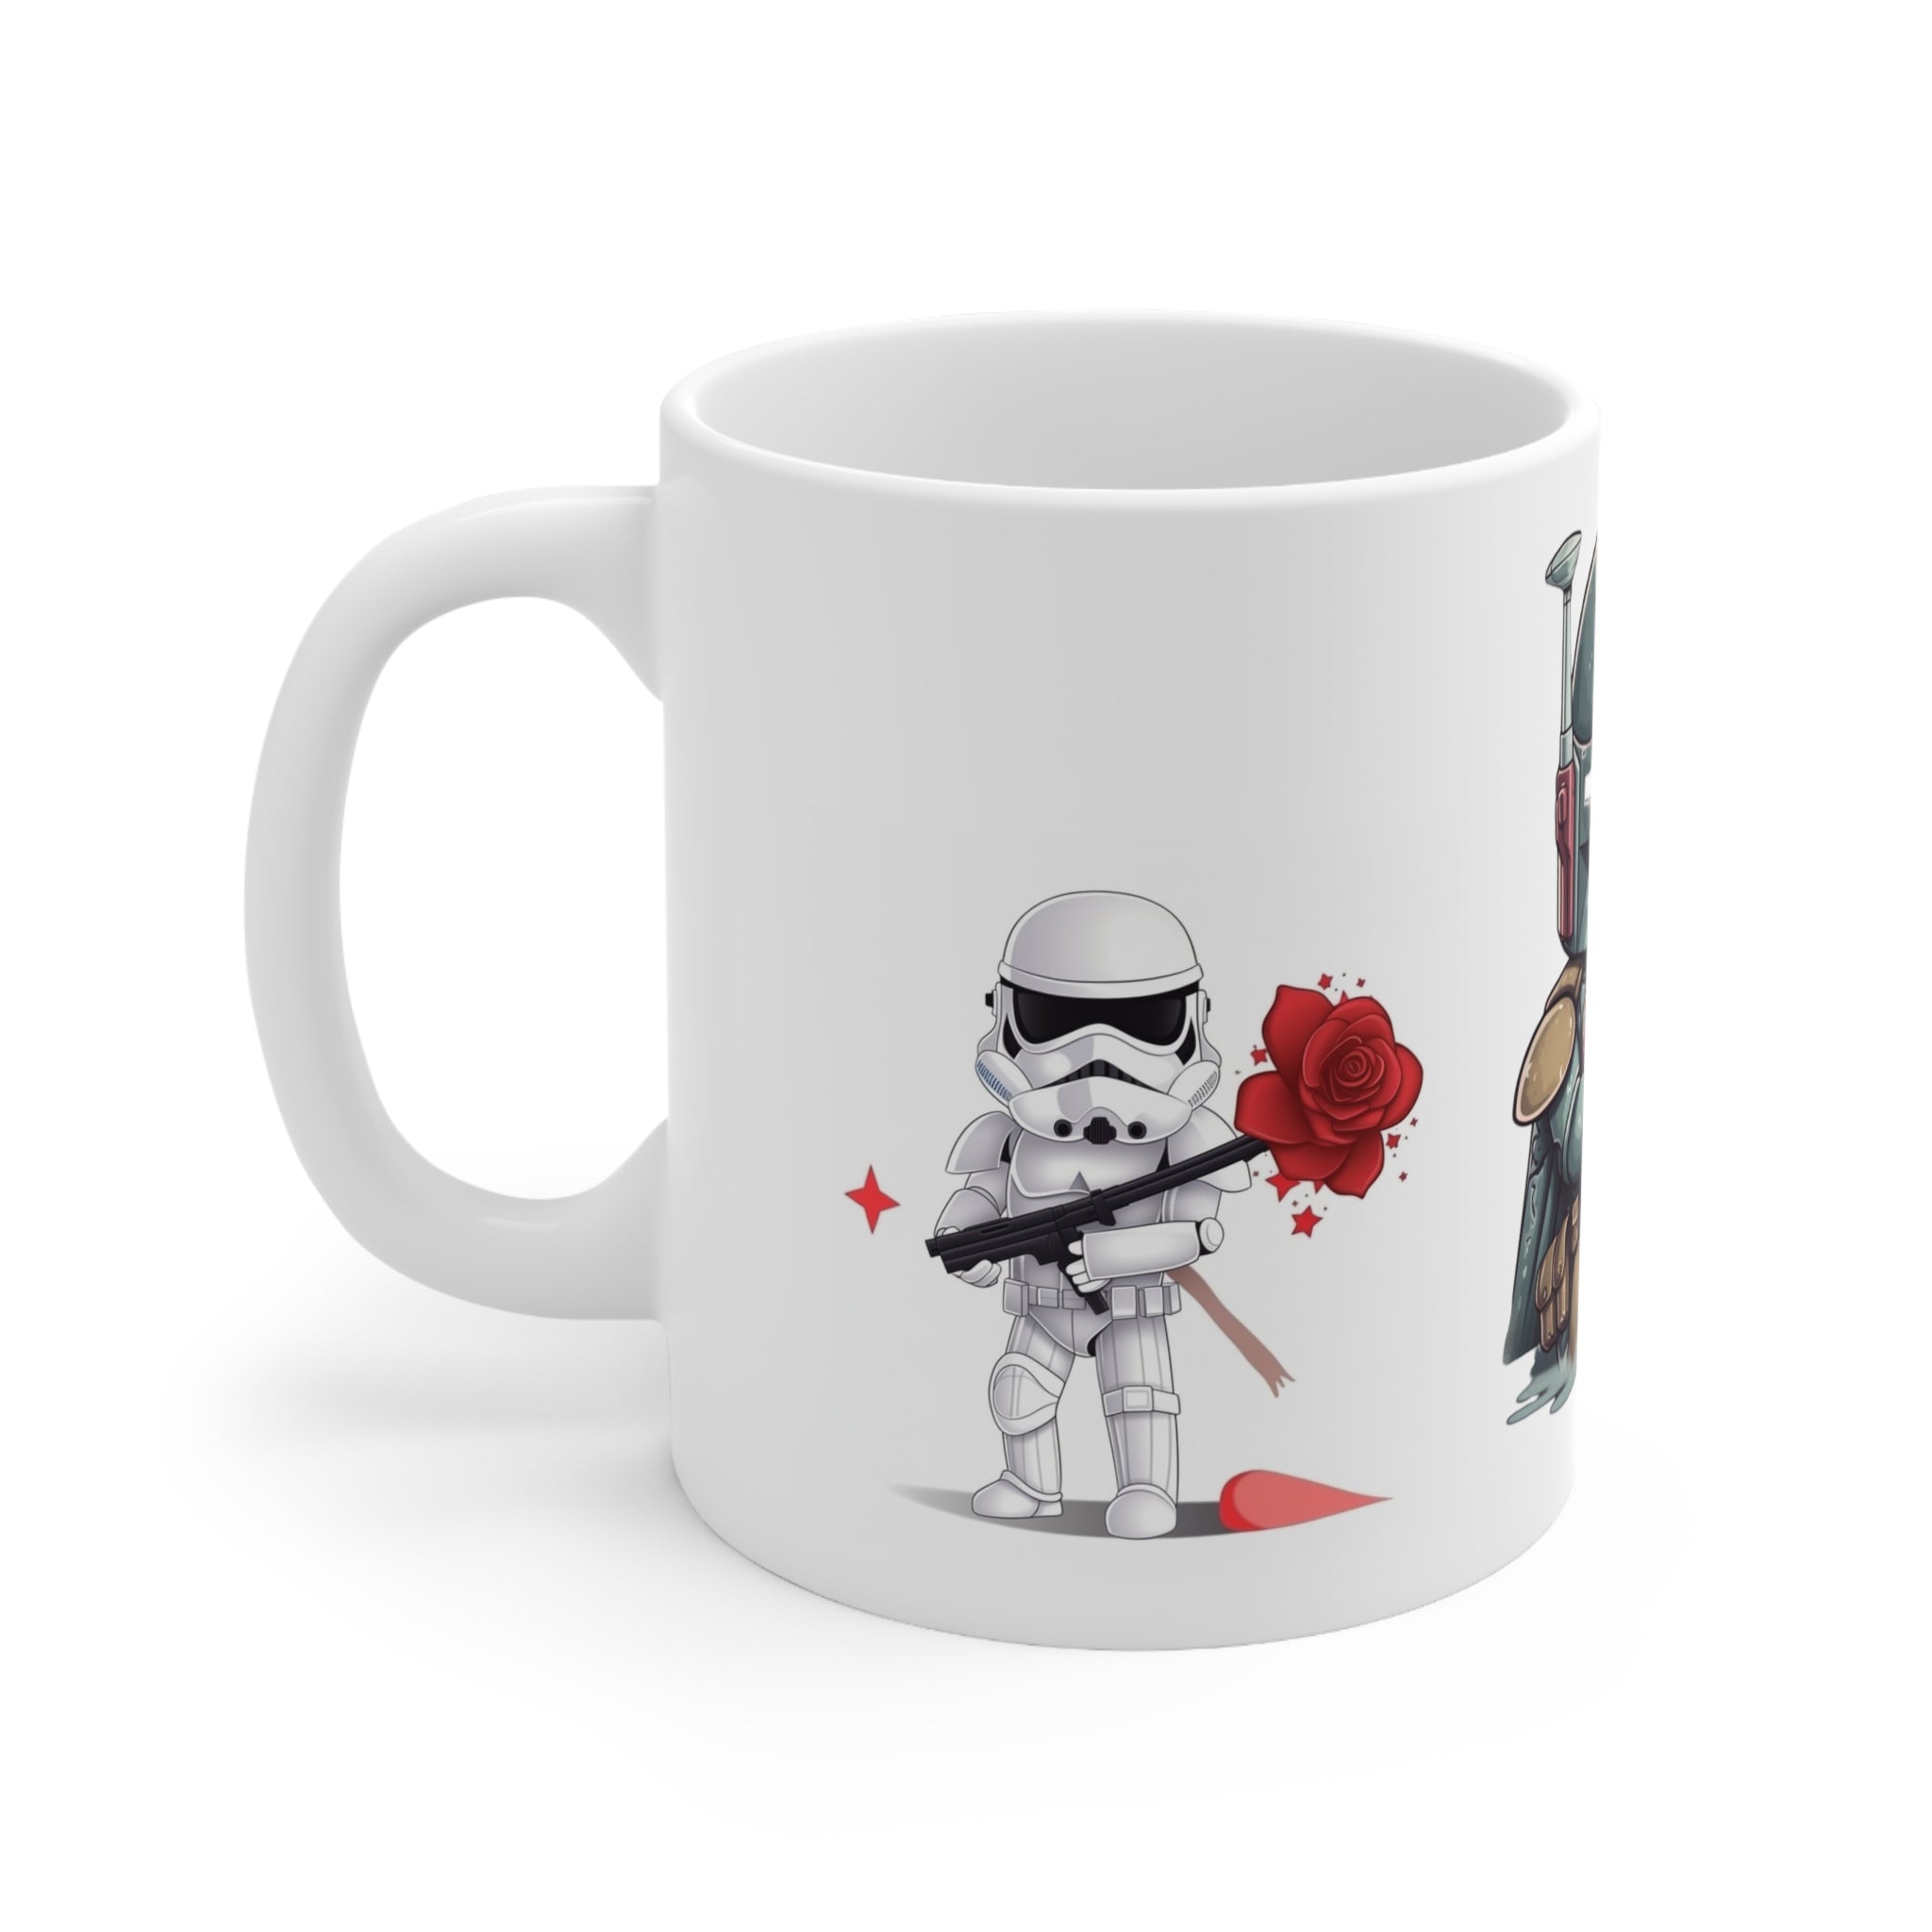 Complete Your Original Trilogy Collection with the Retro Sci Fi Series Iconic Bounty Hunter Adorable Cupid Ceramic Mug 11oz - Unique Gift for the One You Love or for the Ideal Gift for Friends and Family